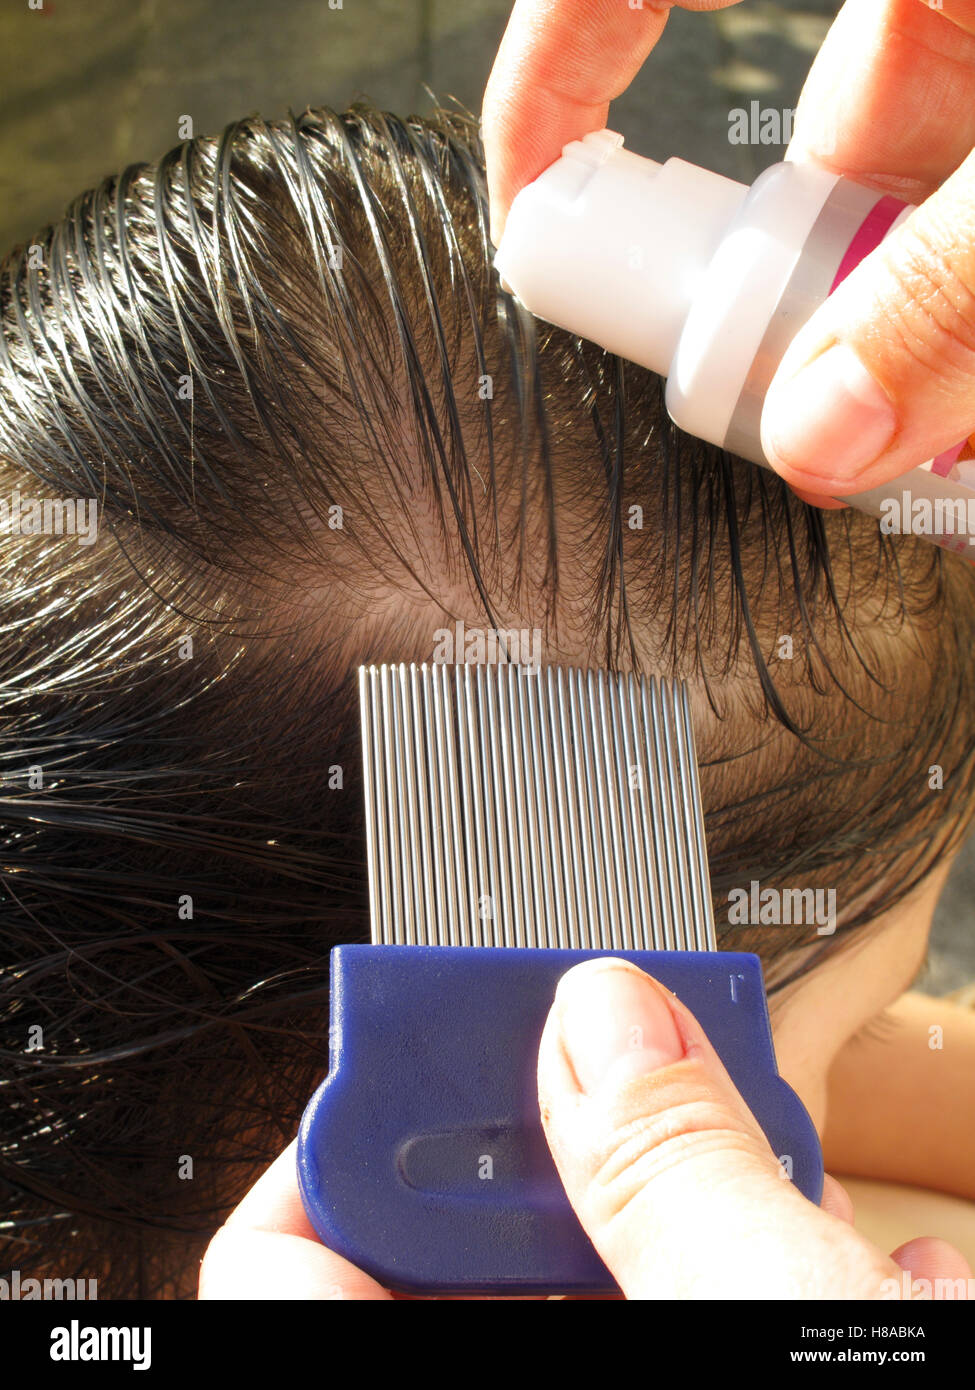 Removal of lice from a child's hair with a lice comb Stock Photo